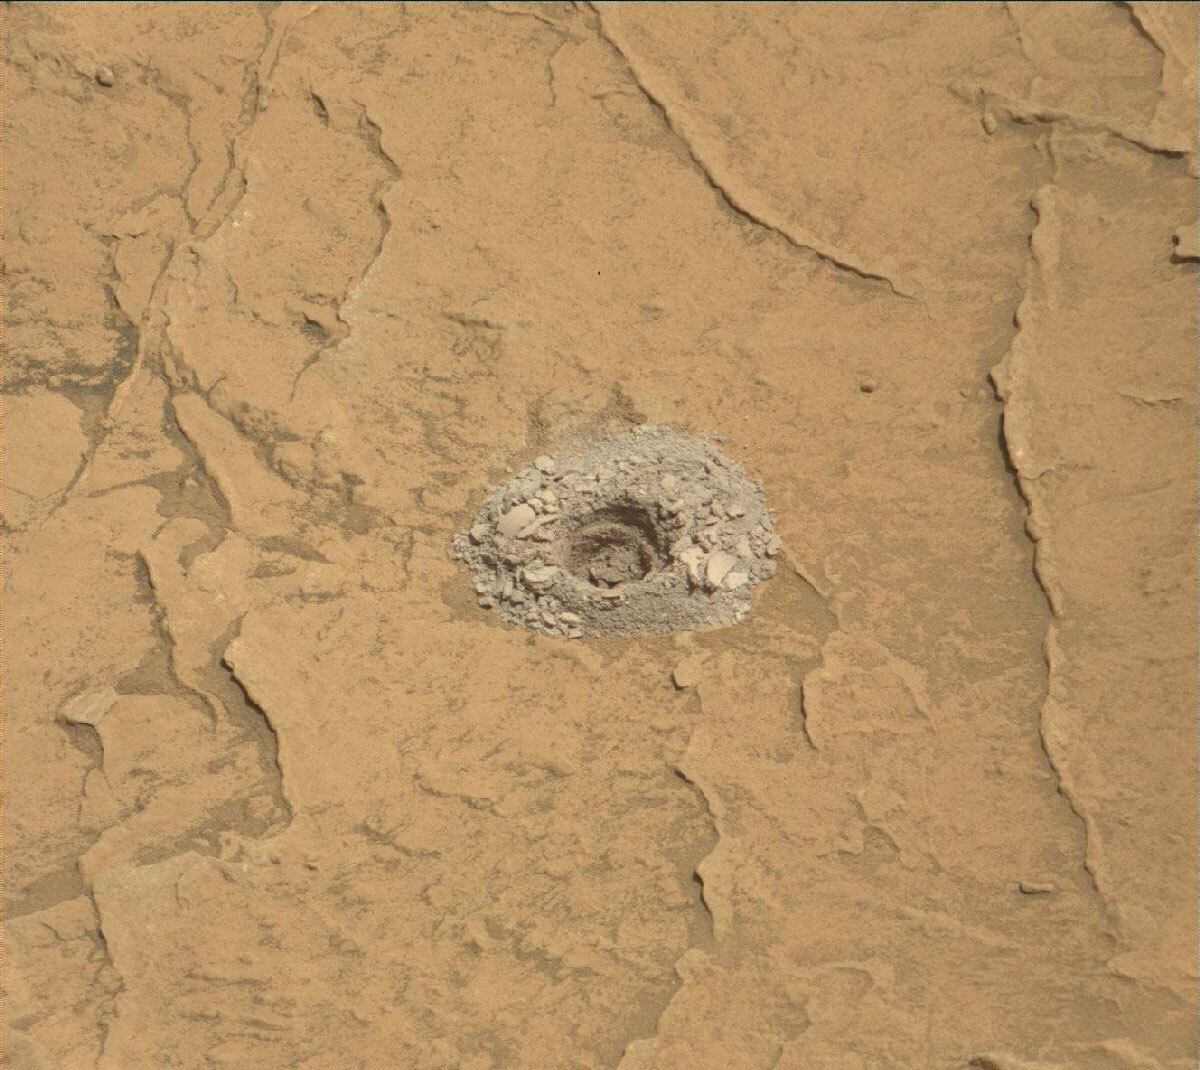 Sol 3094 Mastcam image of the Bardou drill hole and powdered material.